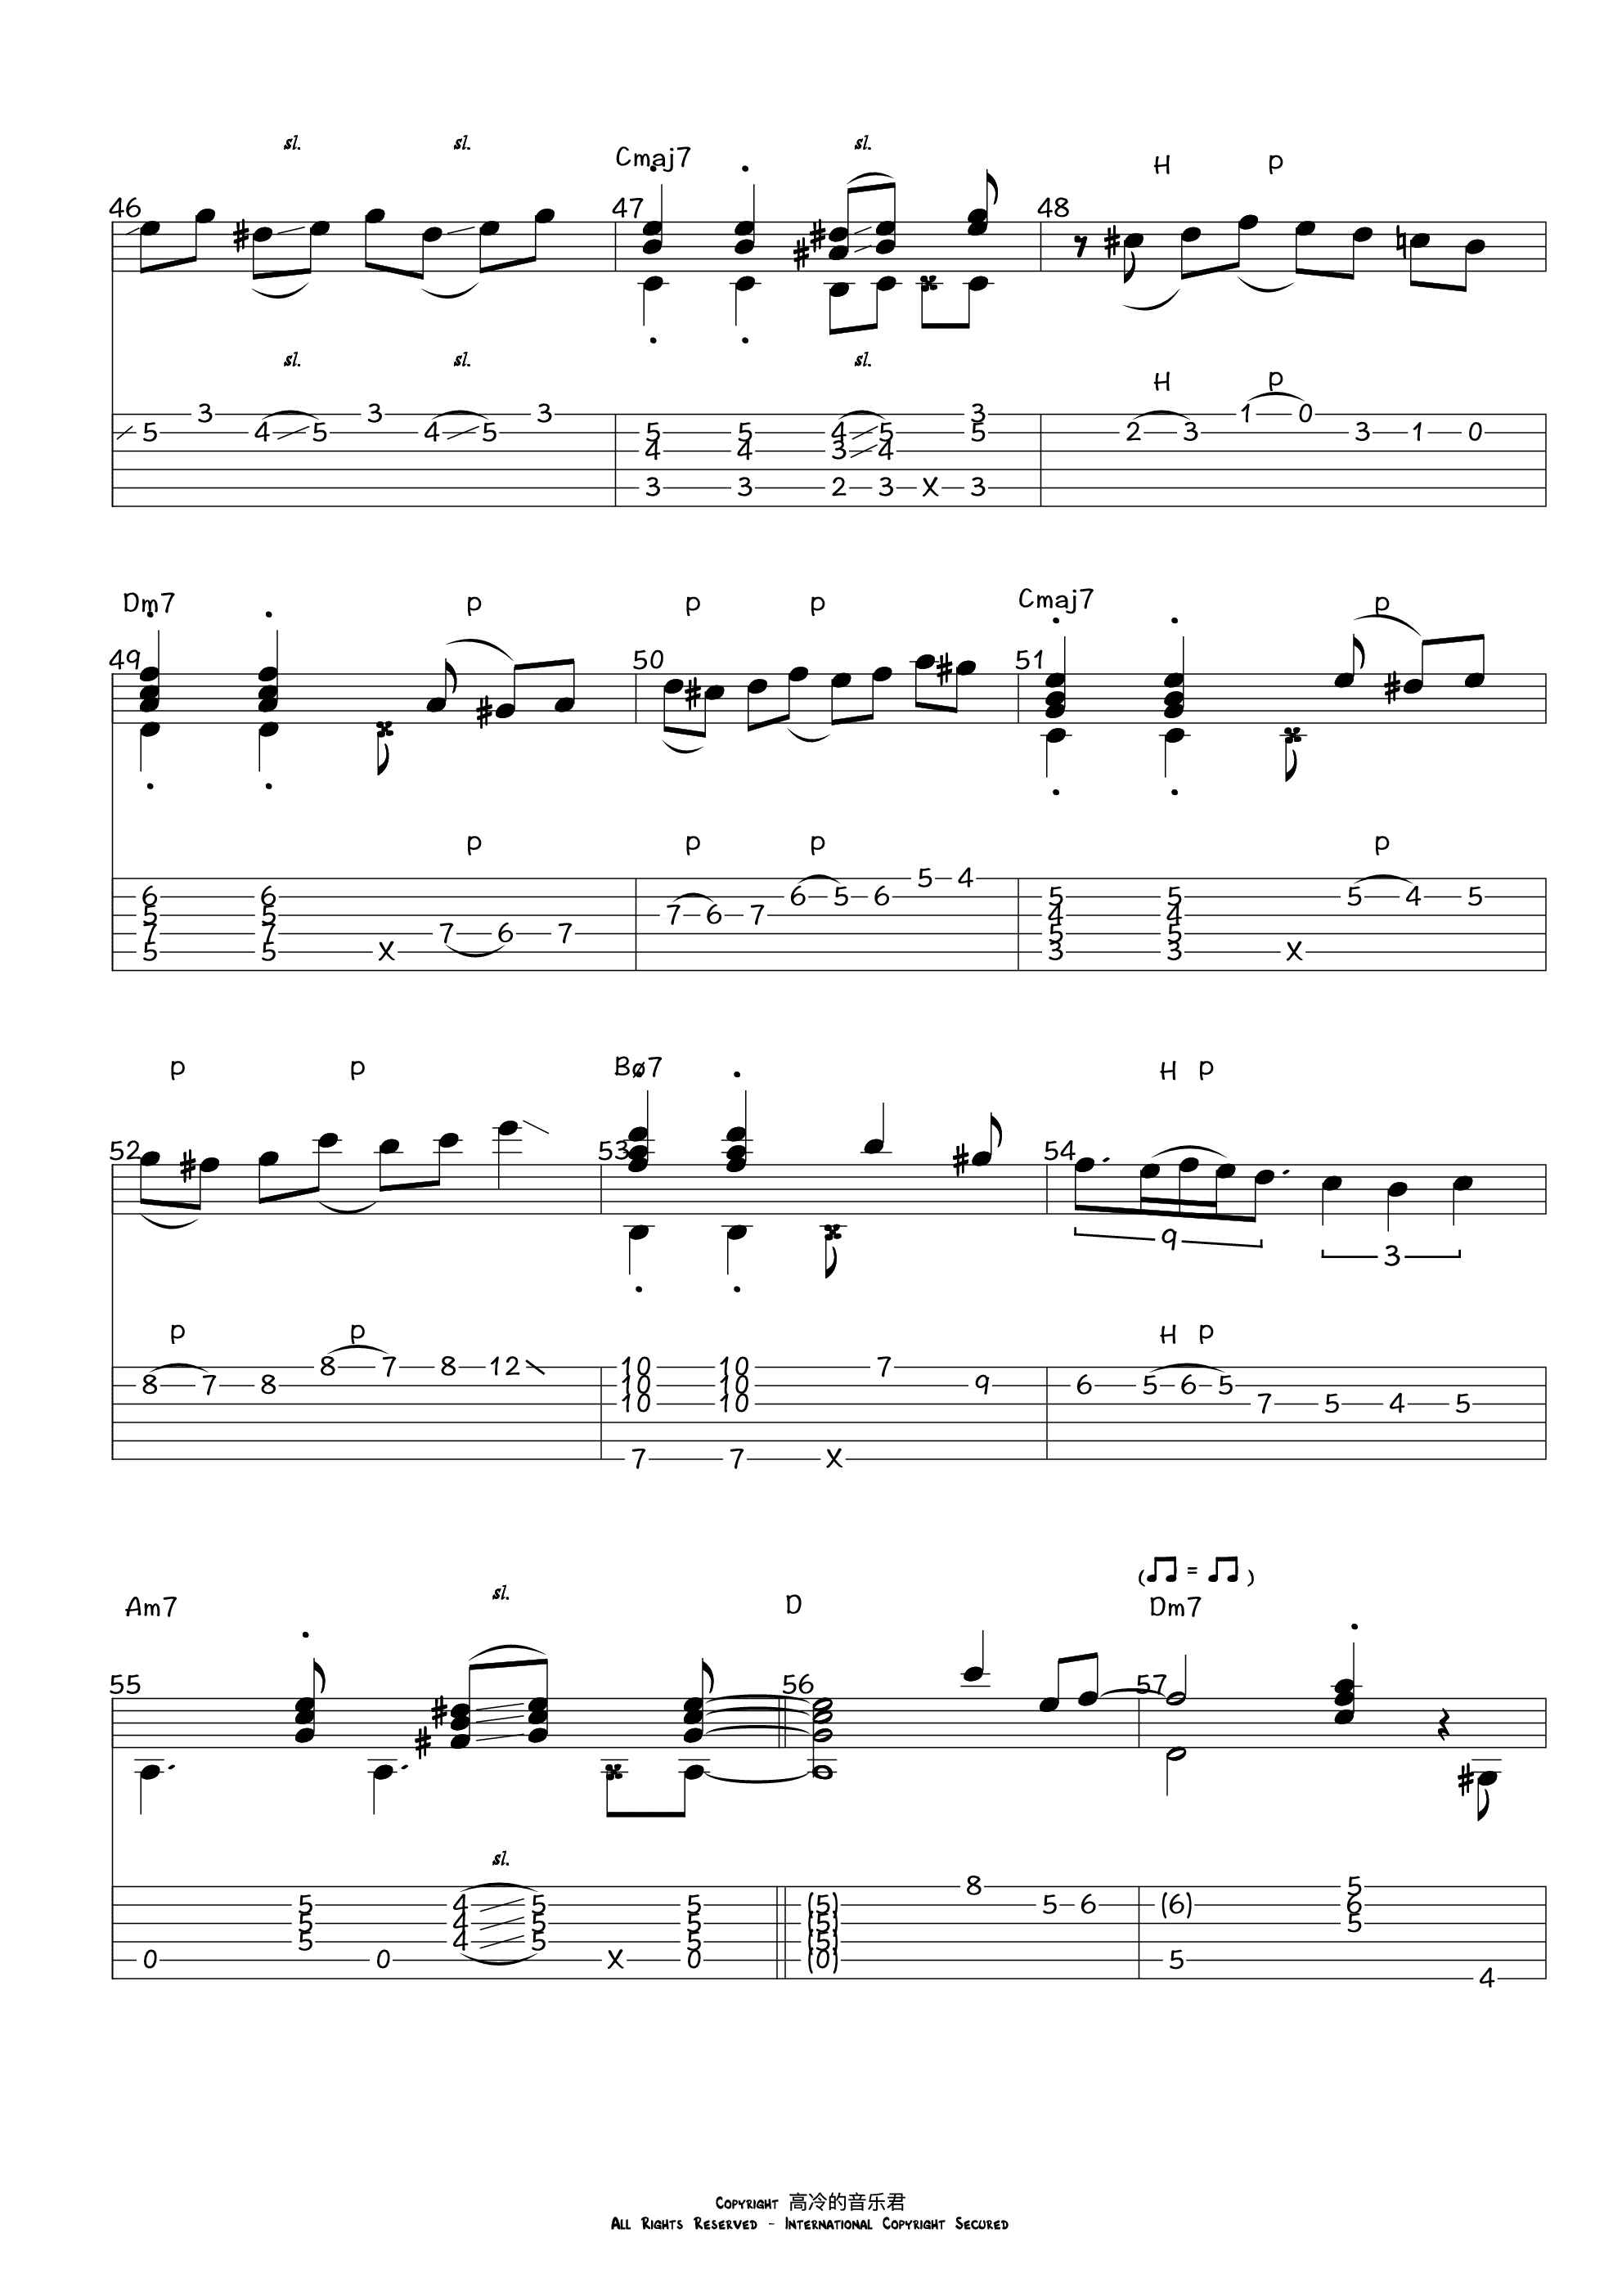 Fly Me to the Moon for guitar. Guitar sheet music and tabs.